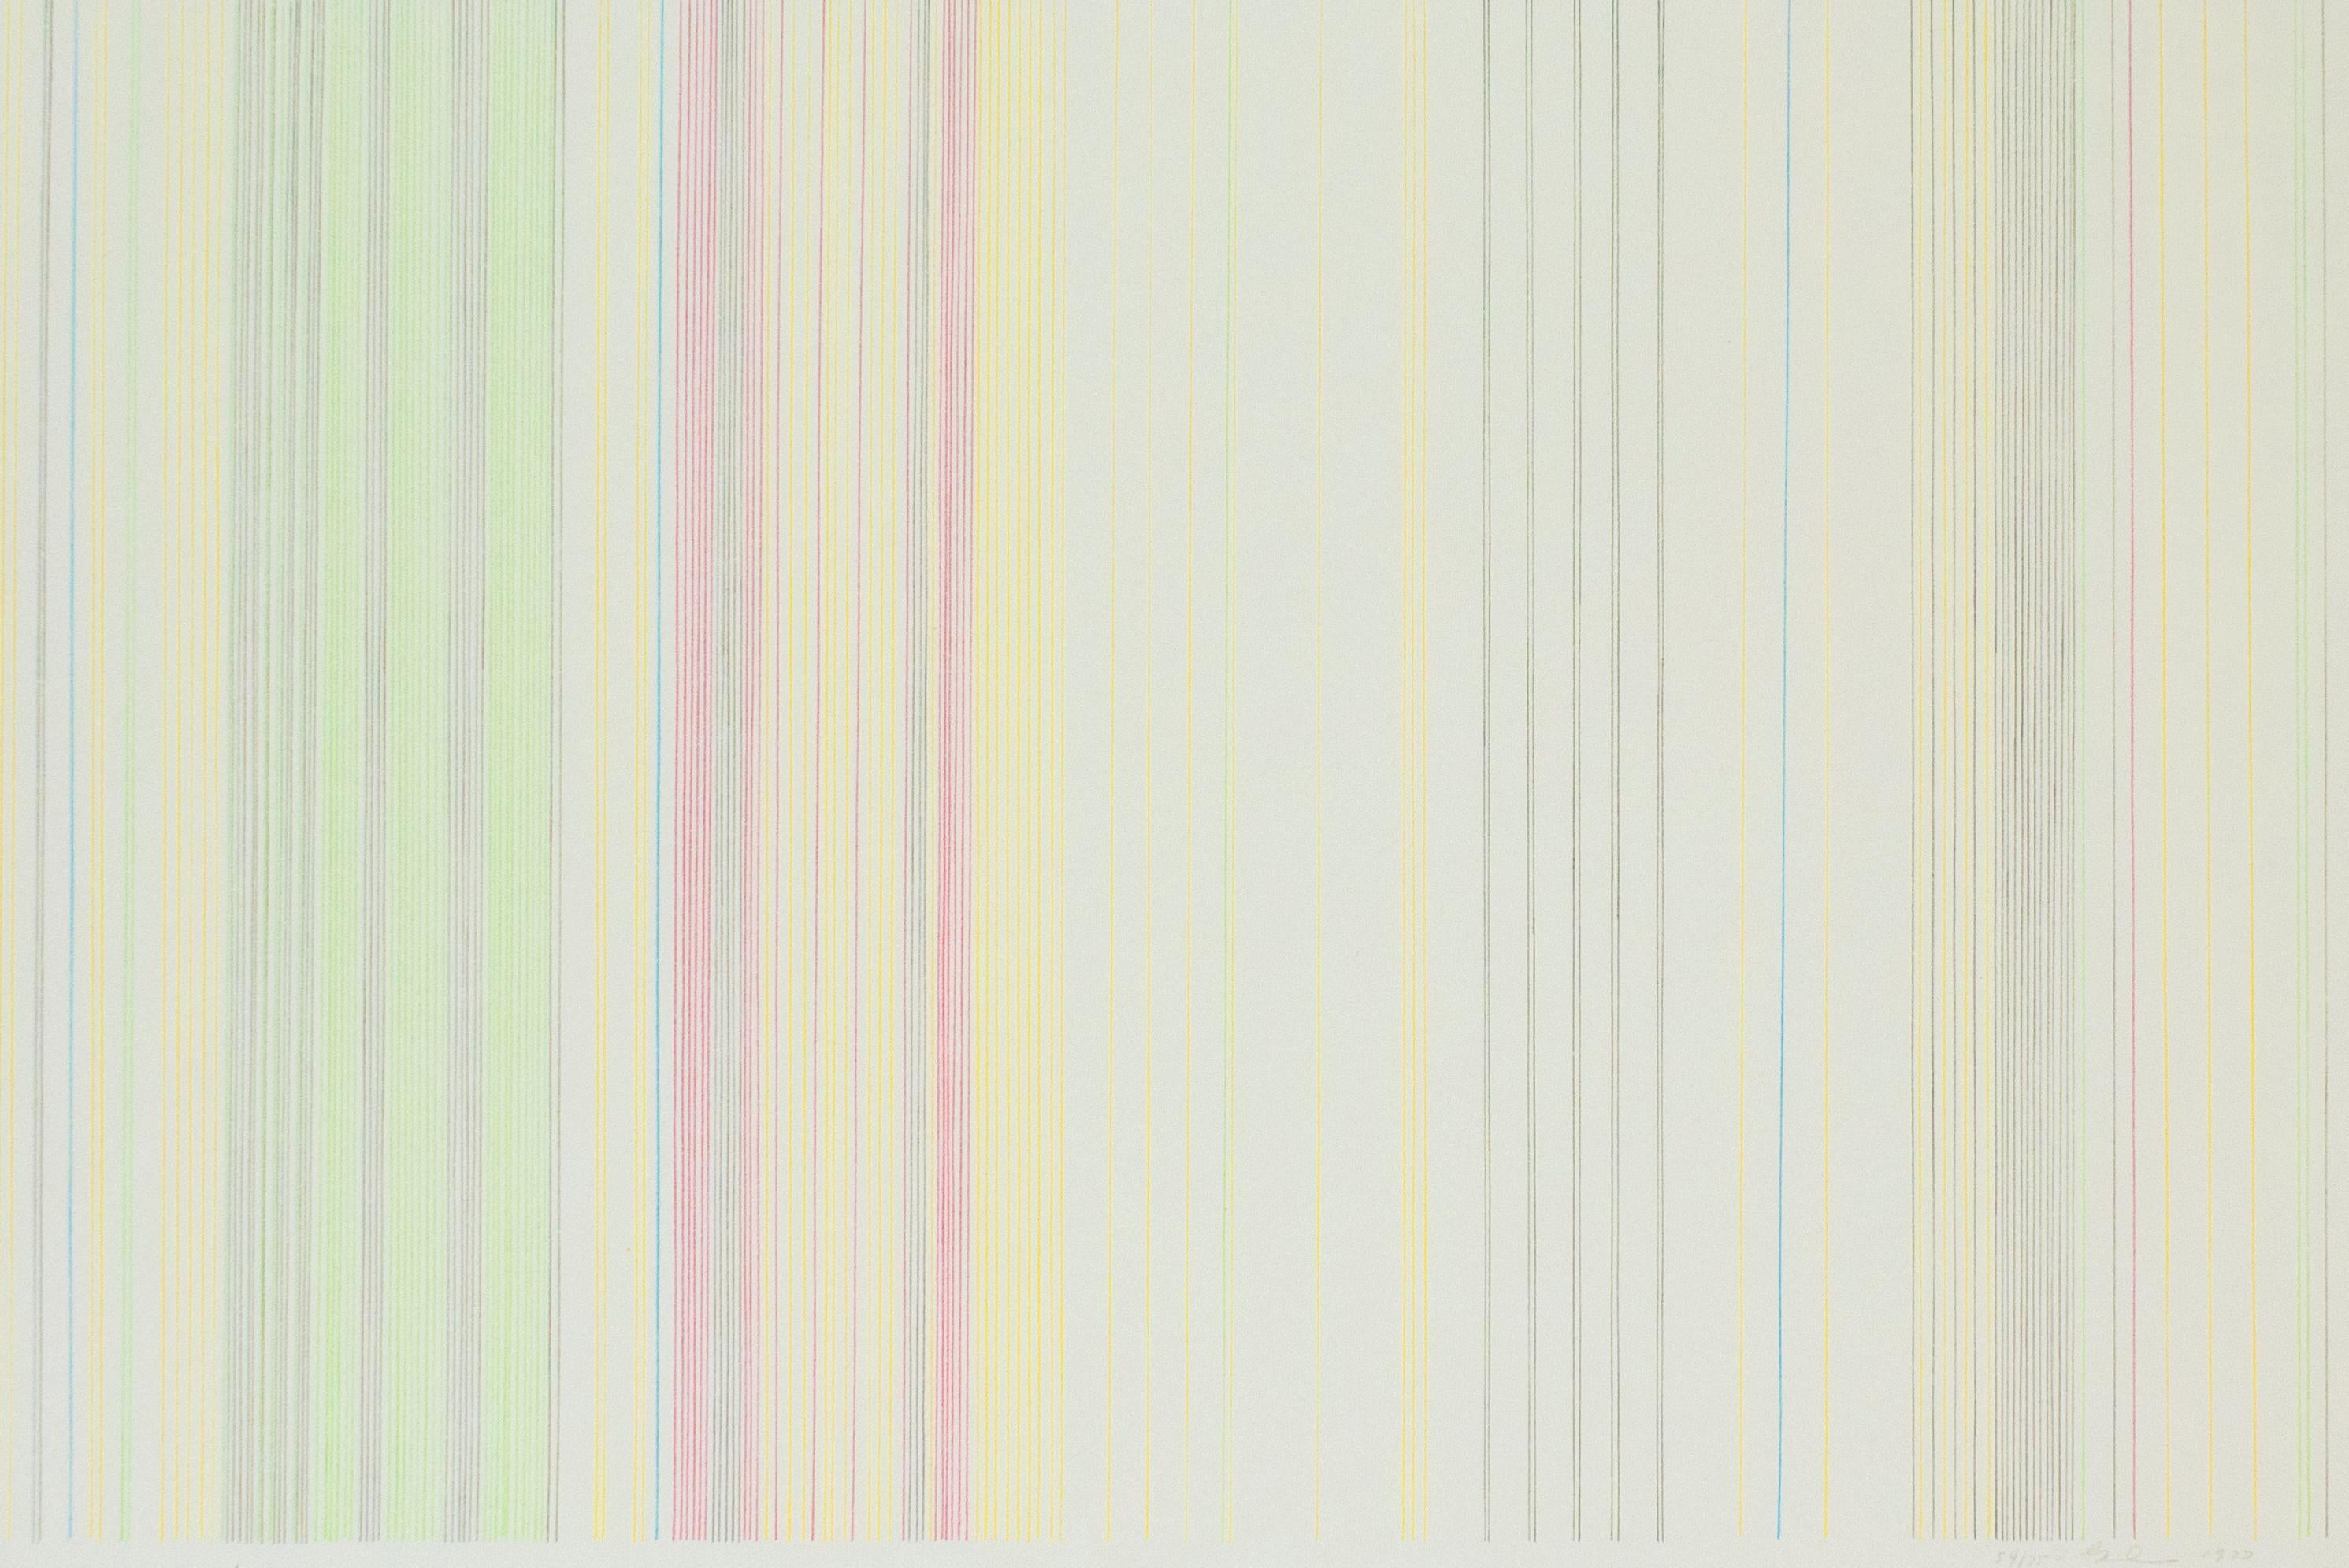 Tightrope: abstract modern minimalist color field drawing with rainbow colors - Abstract Print by Gene Davis